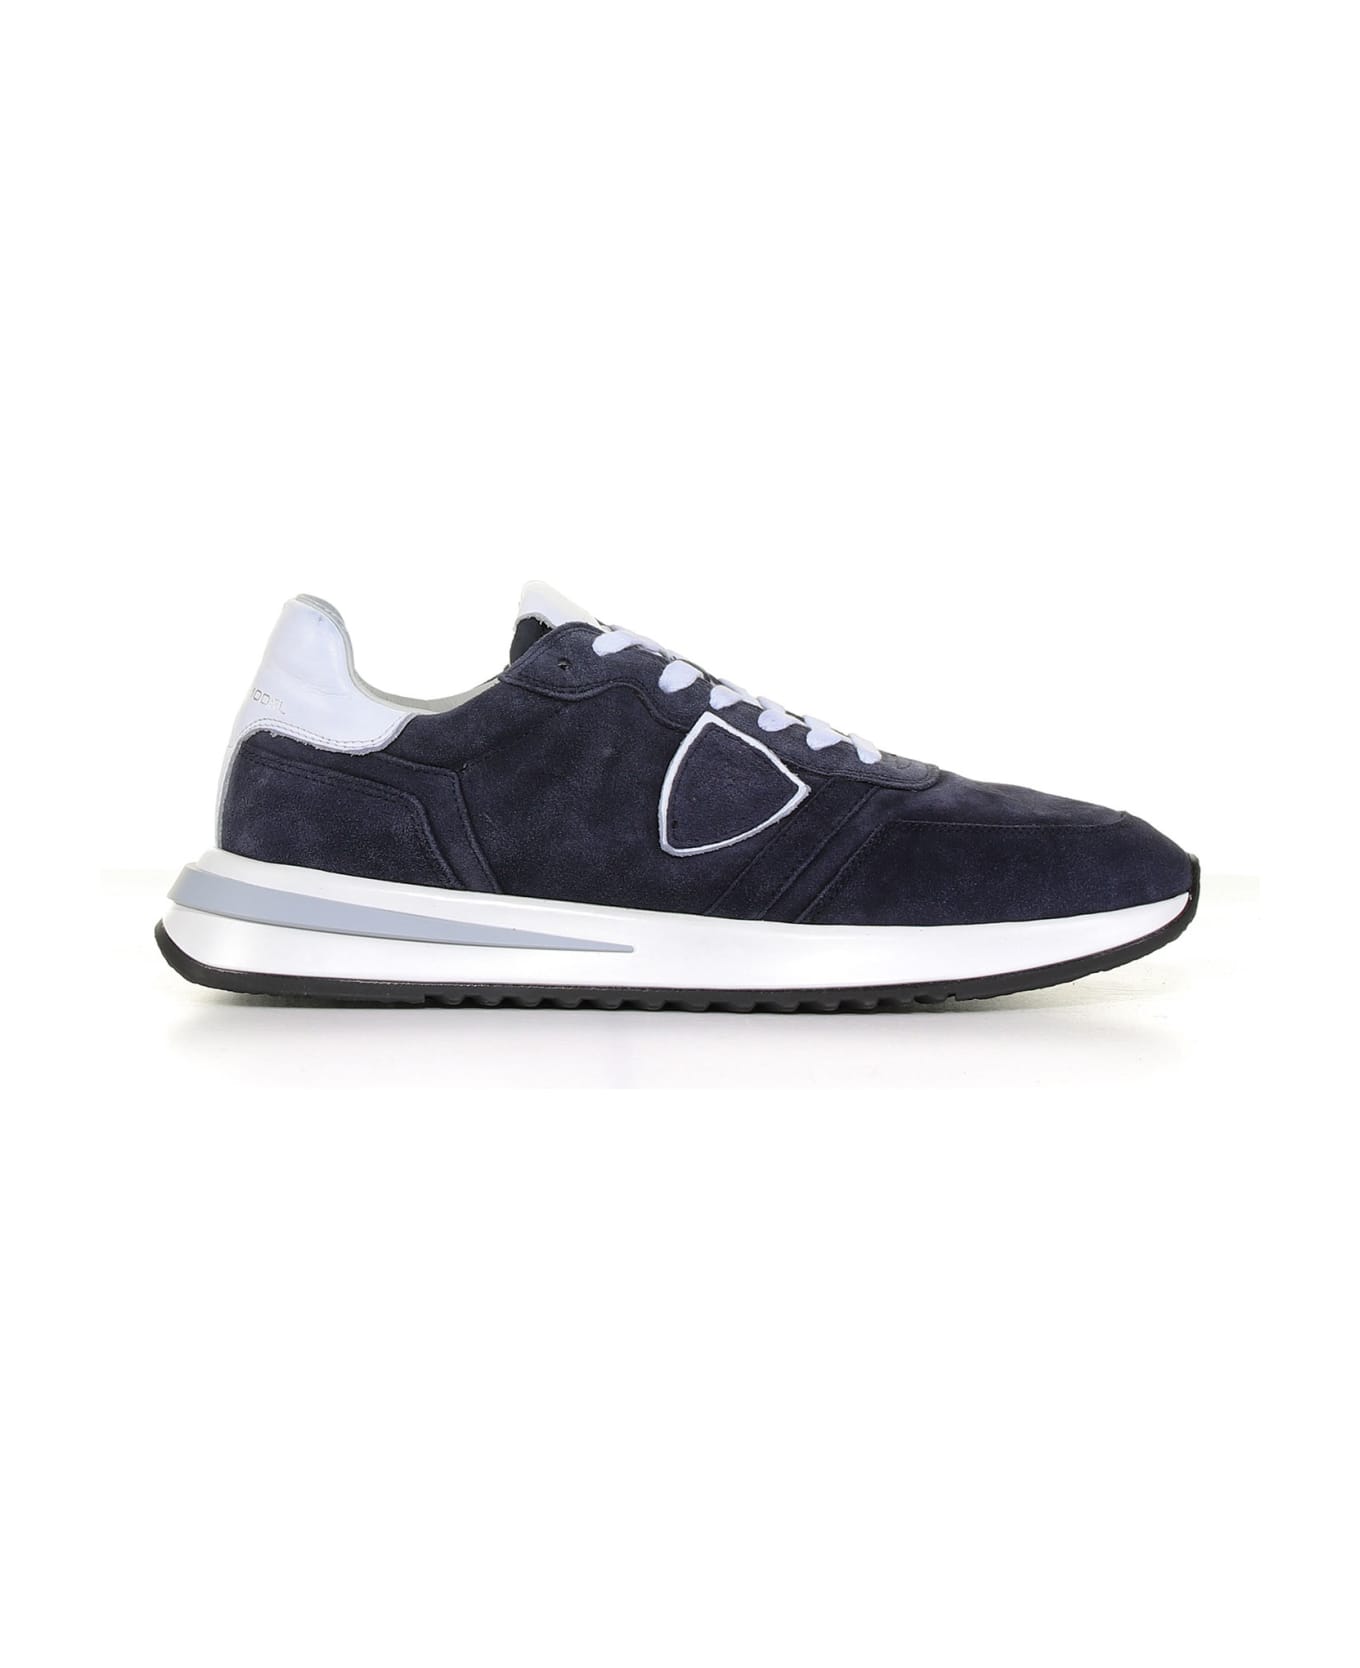 Philippe Model Tropez 2.1 Sneaker In Suede With Leather Details - Blu